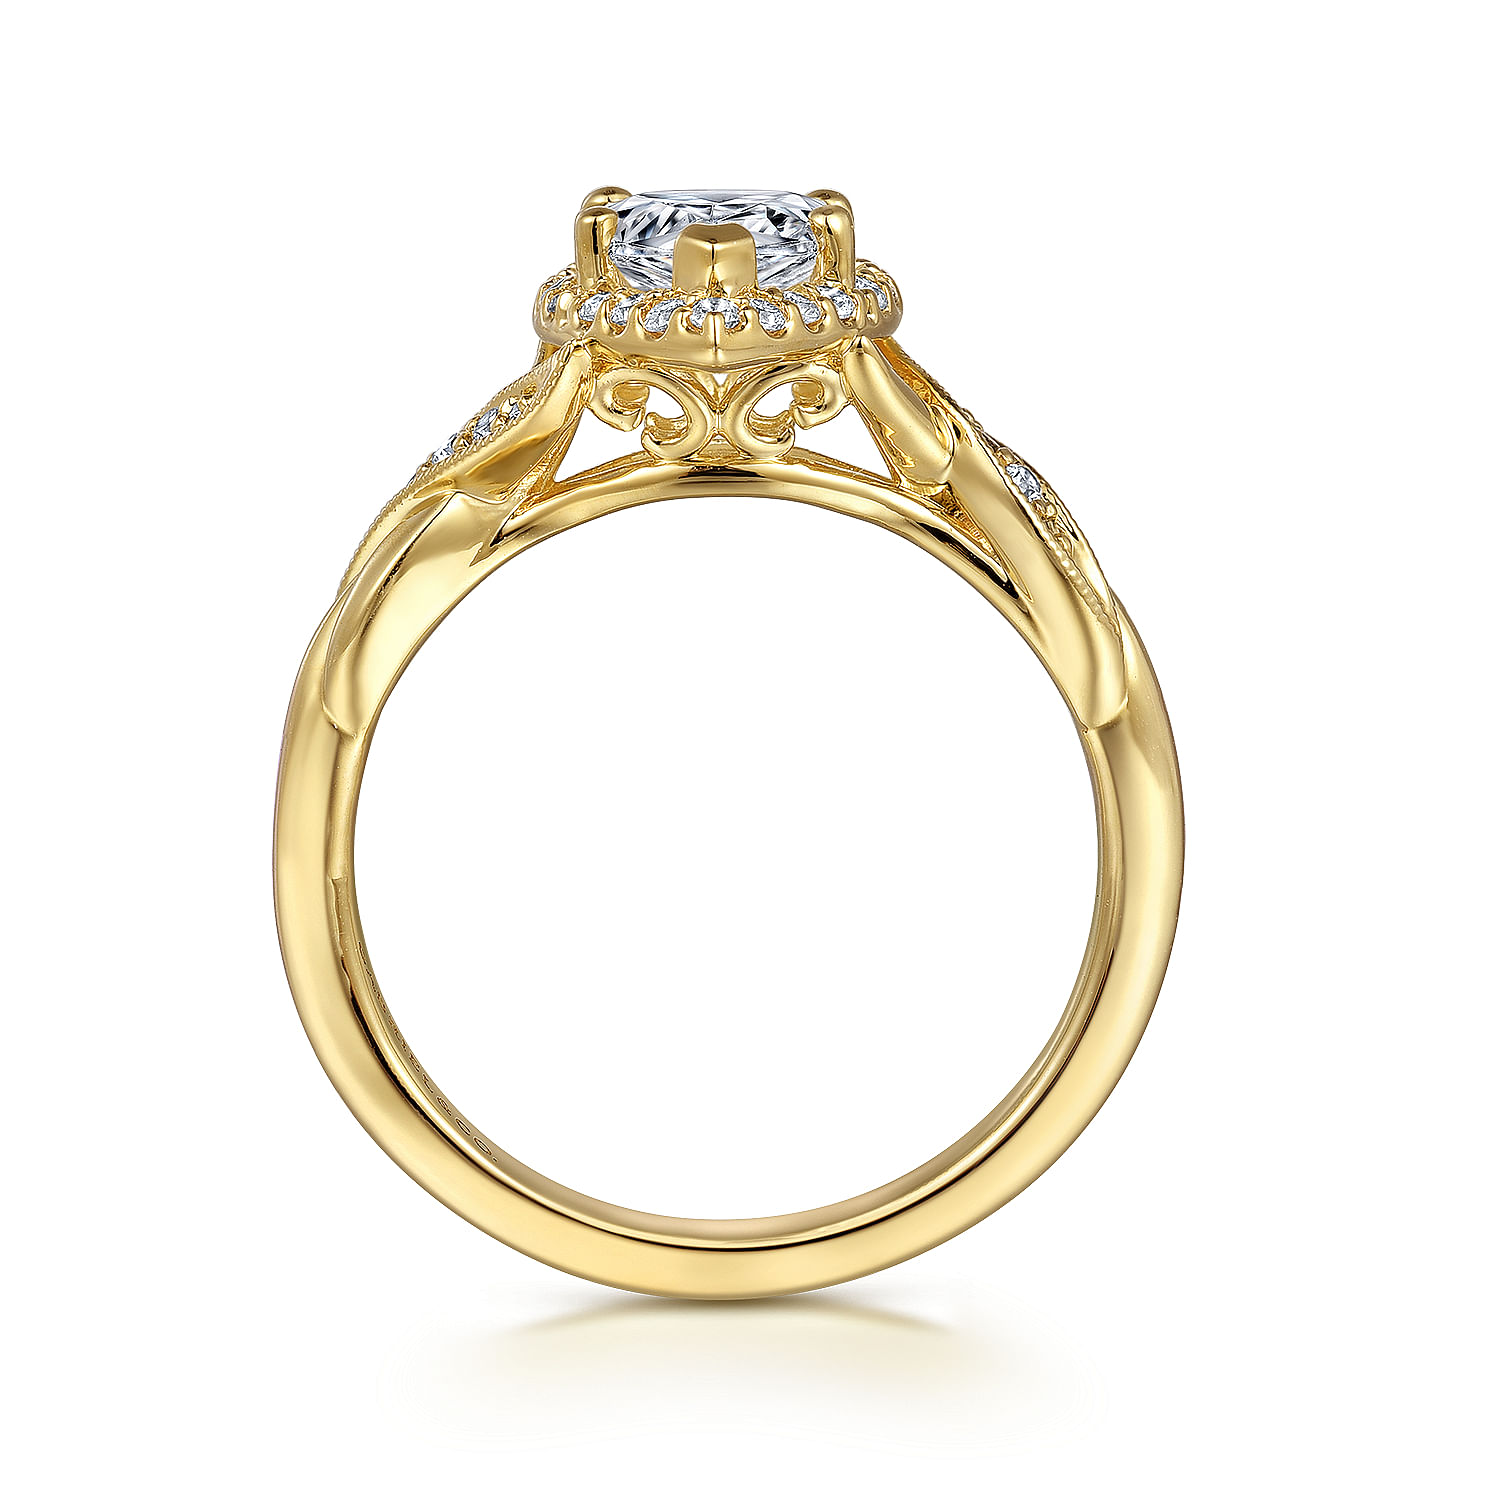 Vintage Inspired 14K Yellow Gold Pear Shape Halo Diamond Engagement Ring